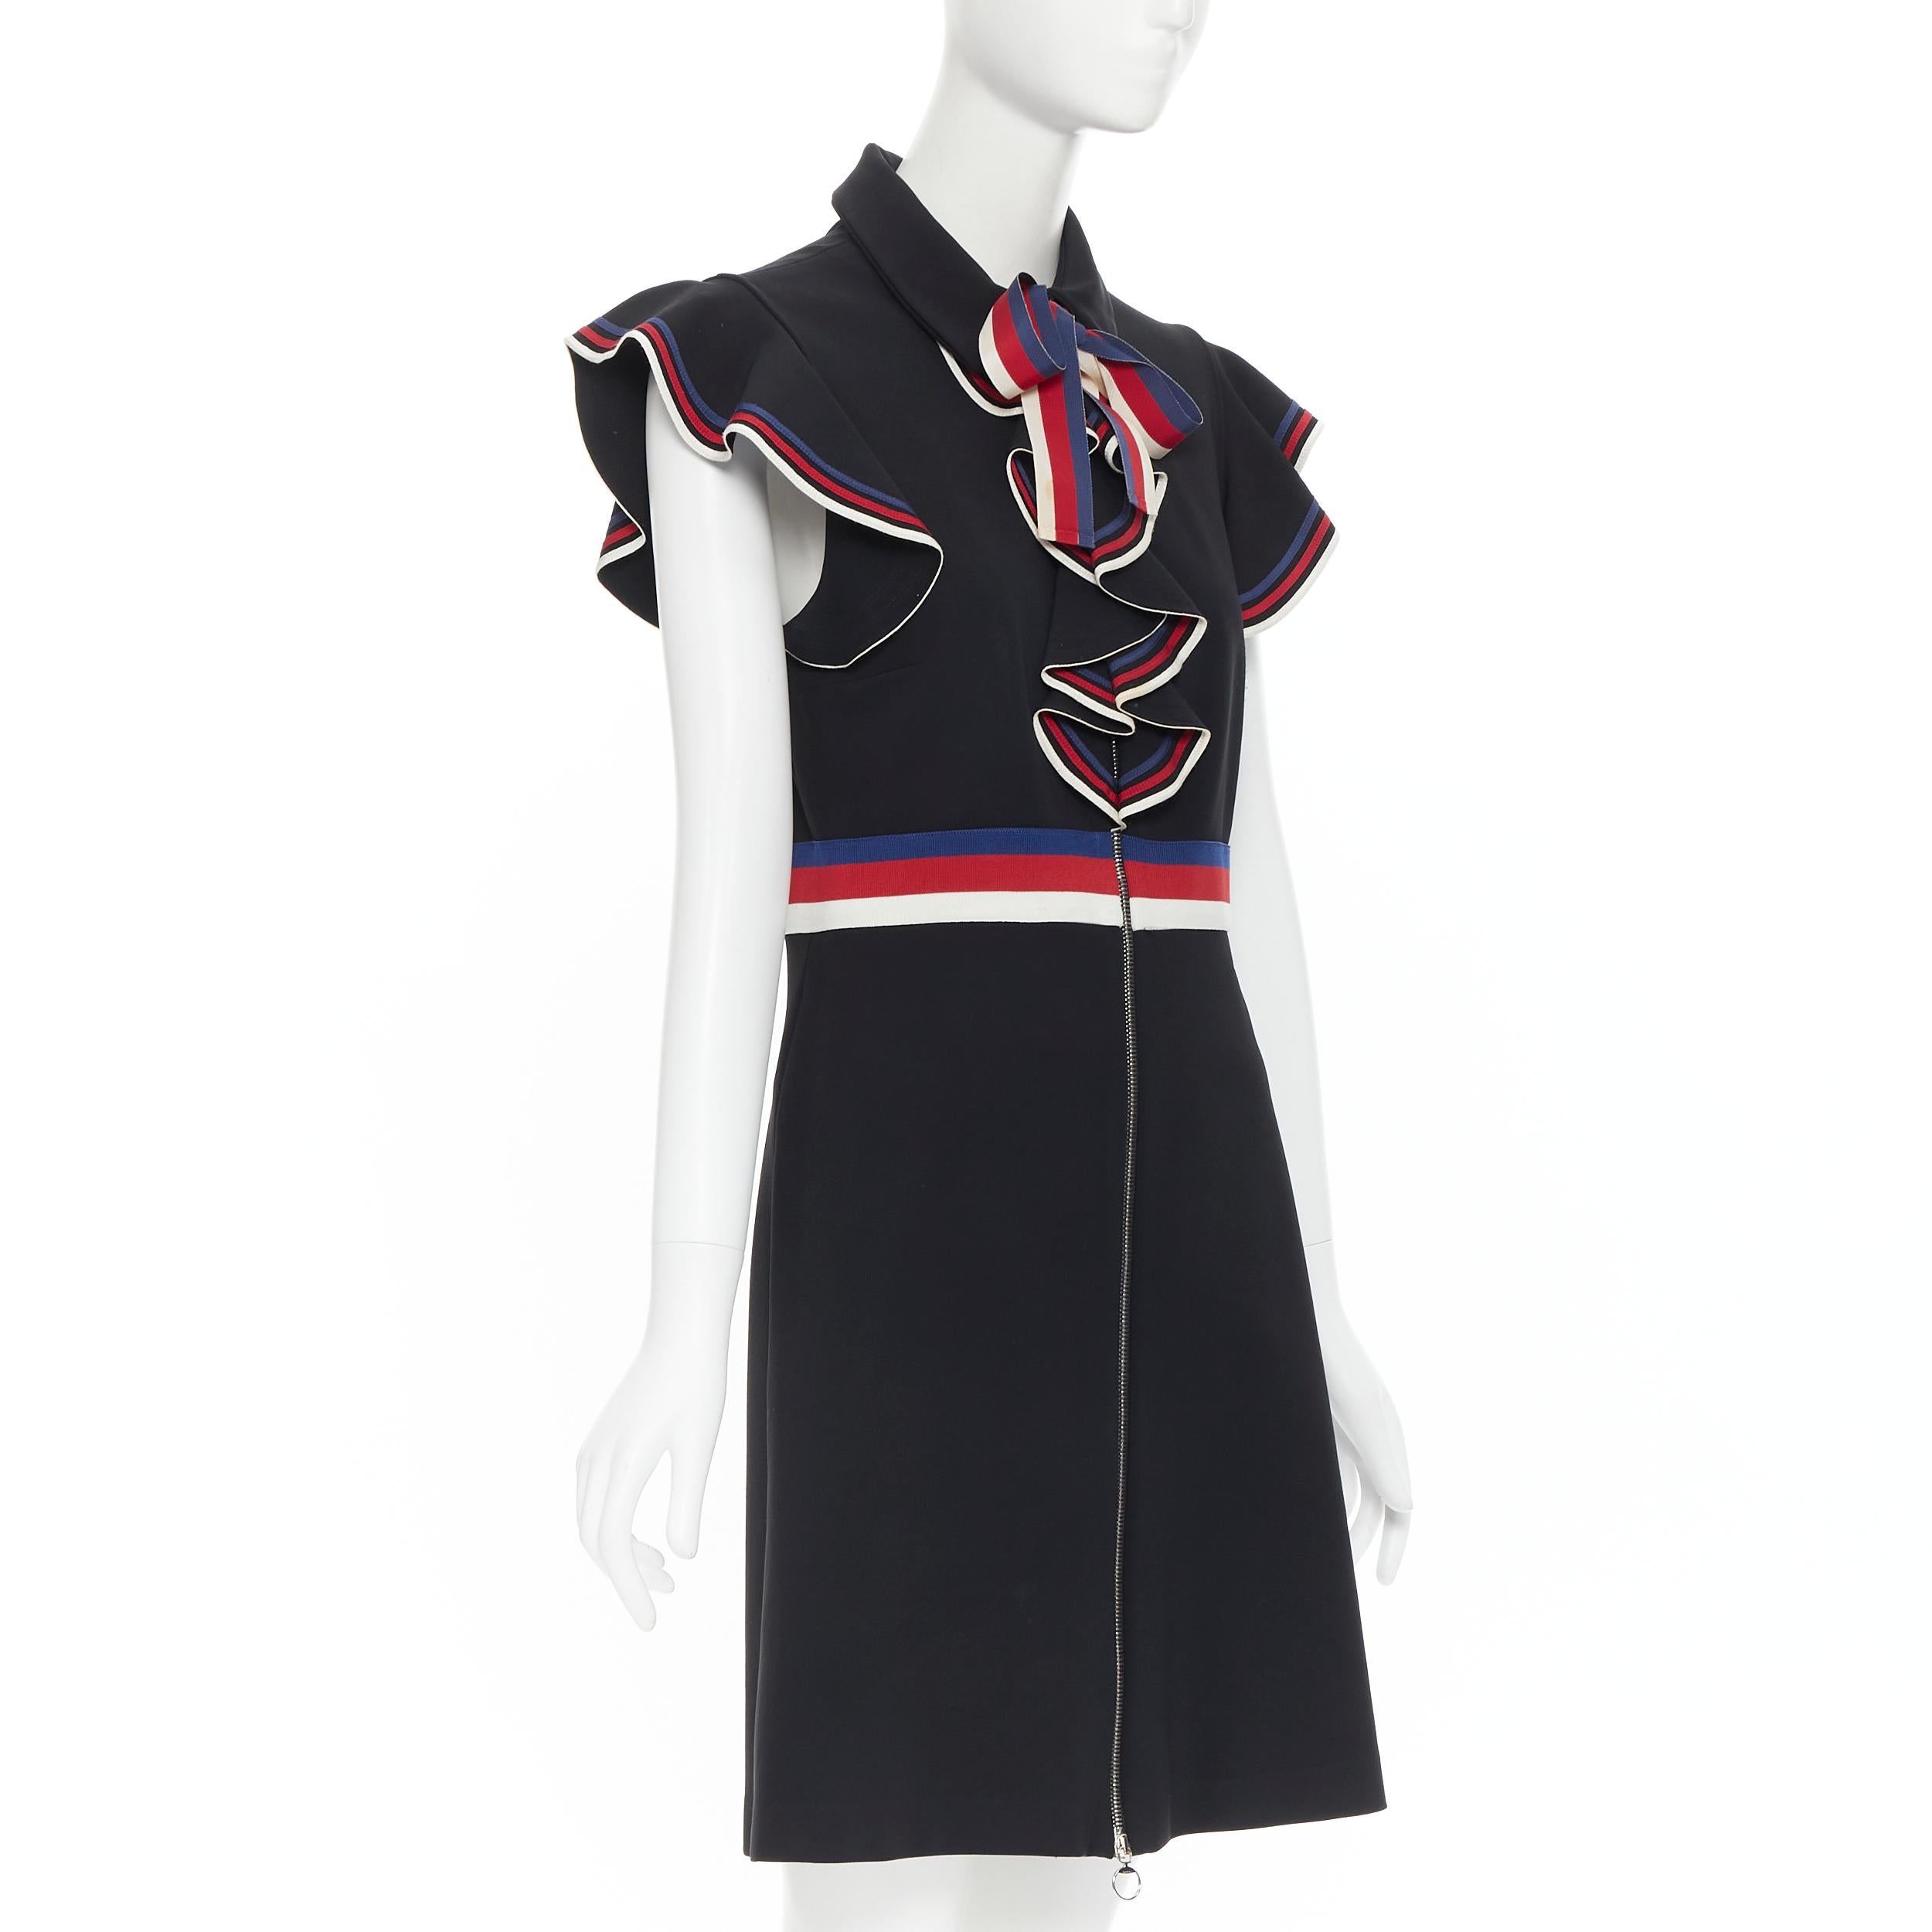 GUCCI black blue red white web ribbon bow flutter sleeve cocktail dress XL Reference: CAKK/A00014 
Brand: Gucci 
Designer: Alessandro Michele 
Material: Viscose 
Color: Black 
Pattern: Solid 
Closure: Zip 
Extra Detail: Red blue white web trimming.